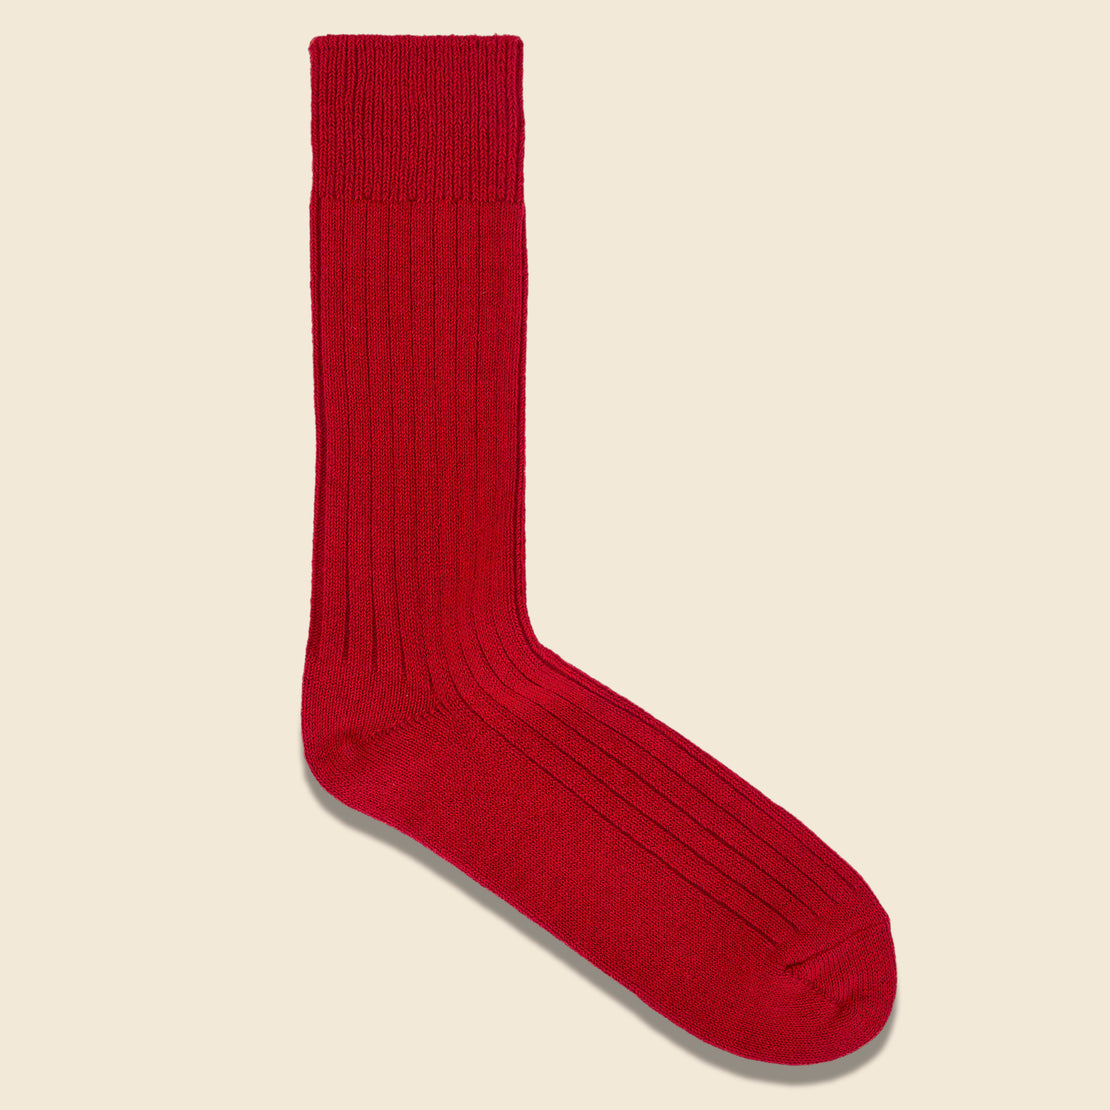 Cotton Wool Rib Sock - Red - RoToTo - STAG Provisions - Accessories - Socks